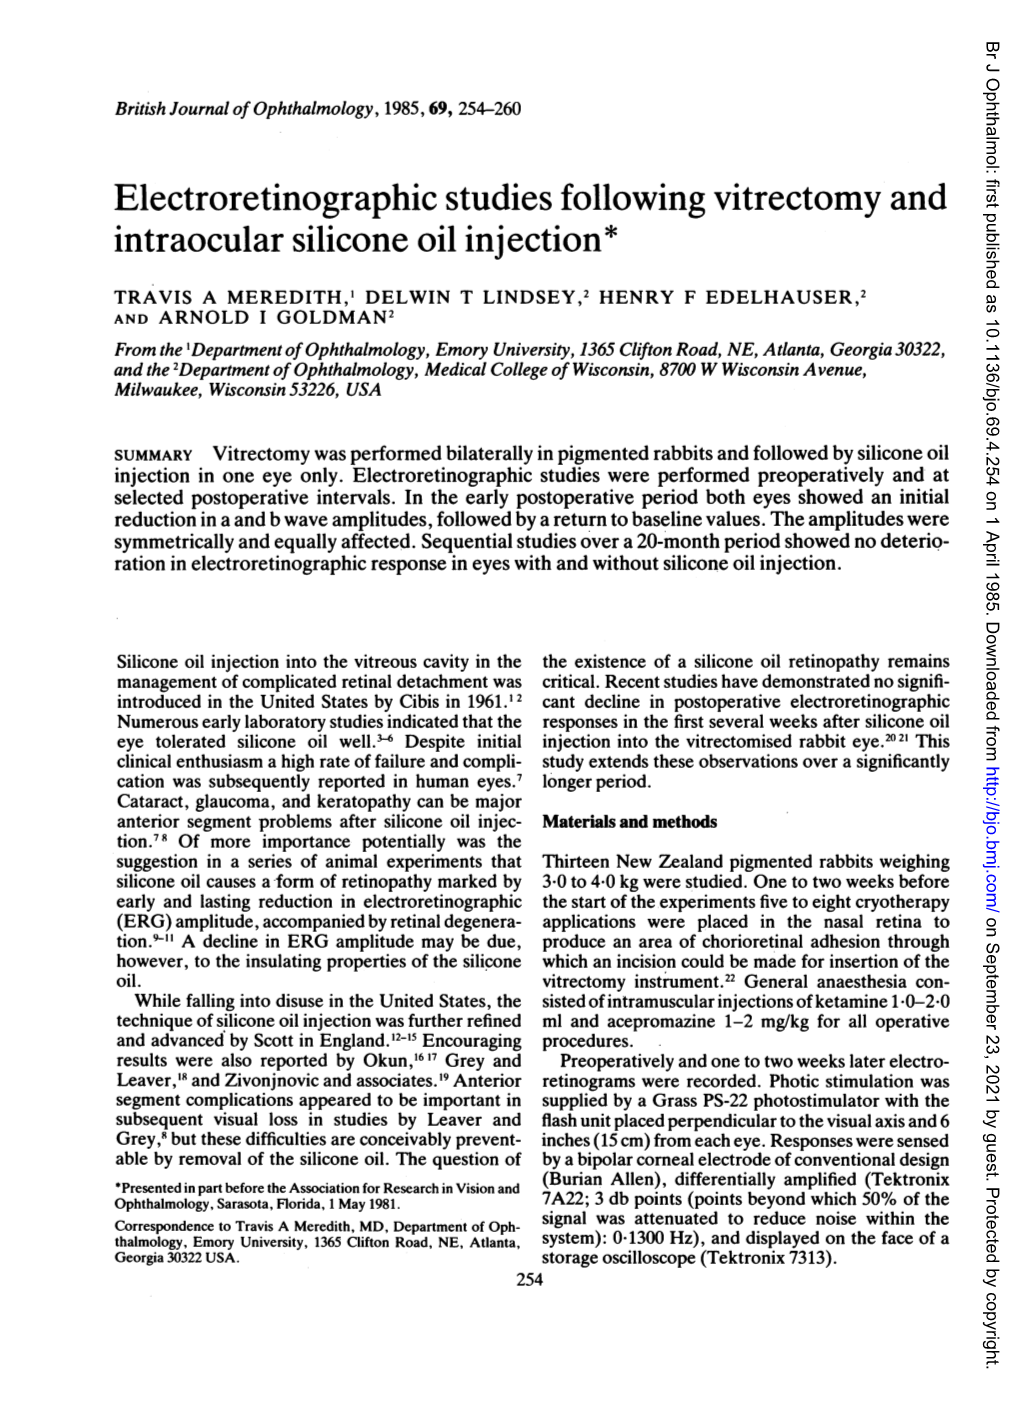 Electroretinographic Studies Following Vitrectomy and Intraocular Silicone Oil Injection*